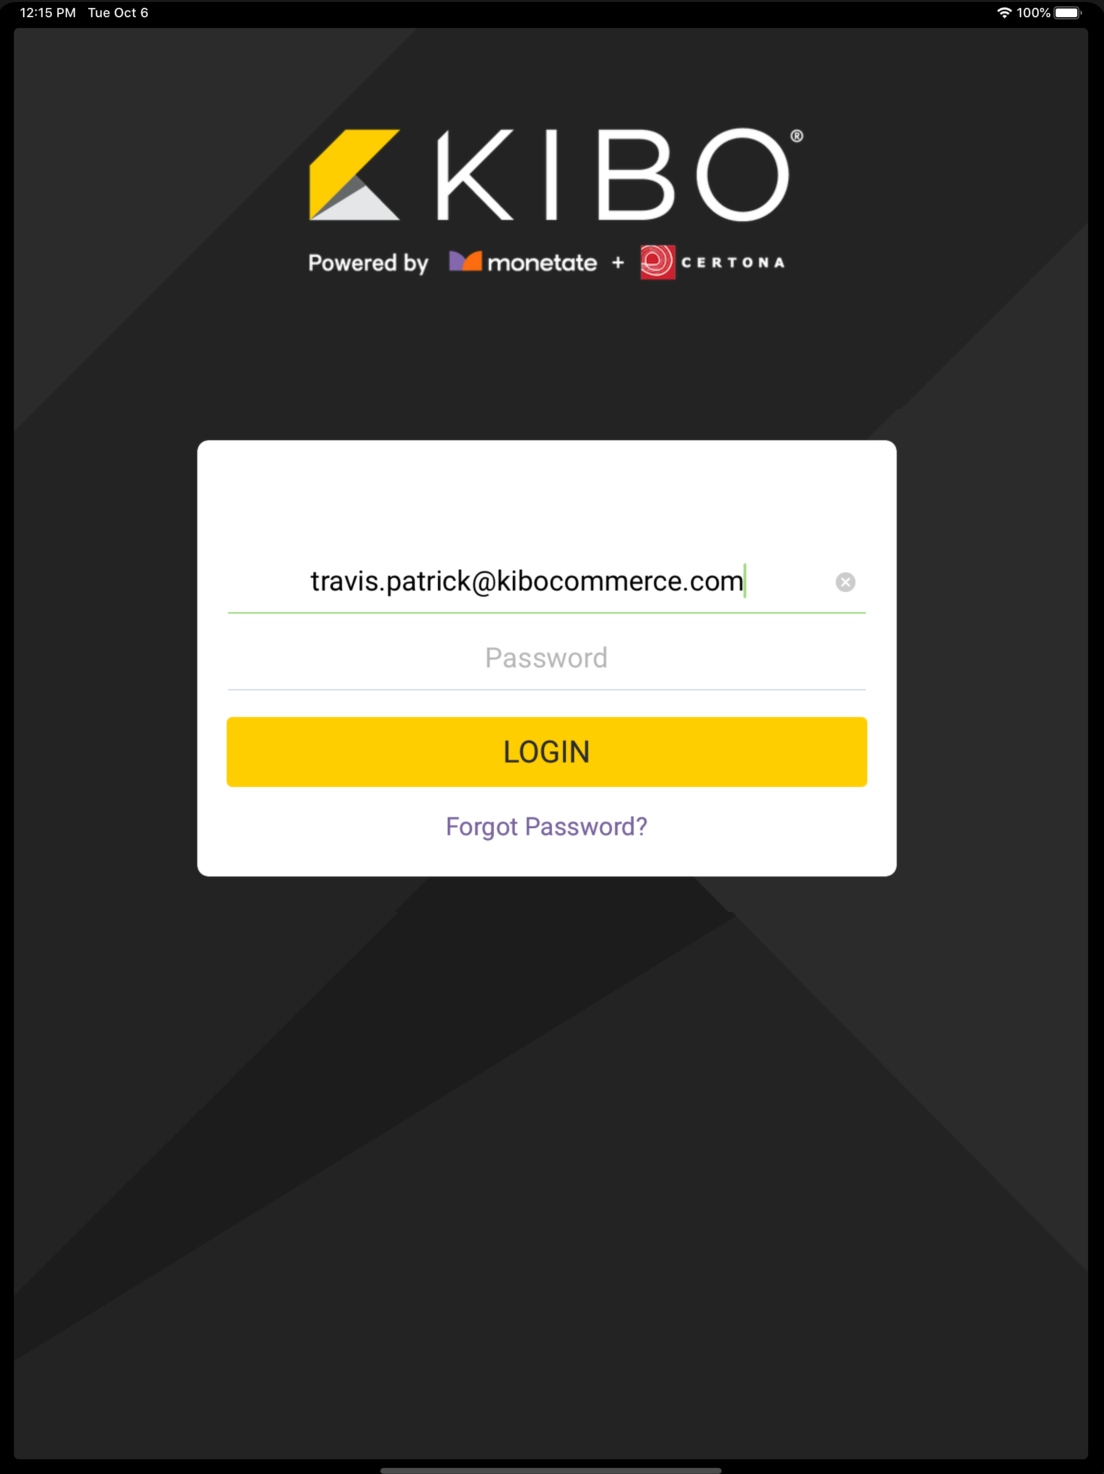 The application login form